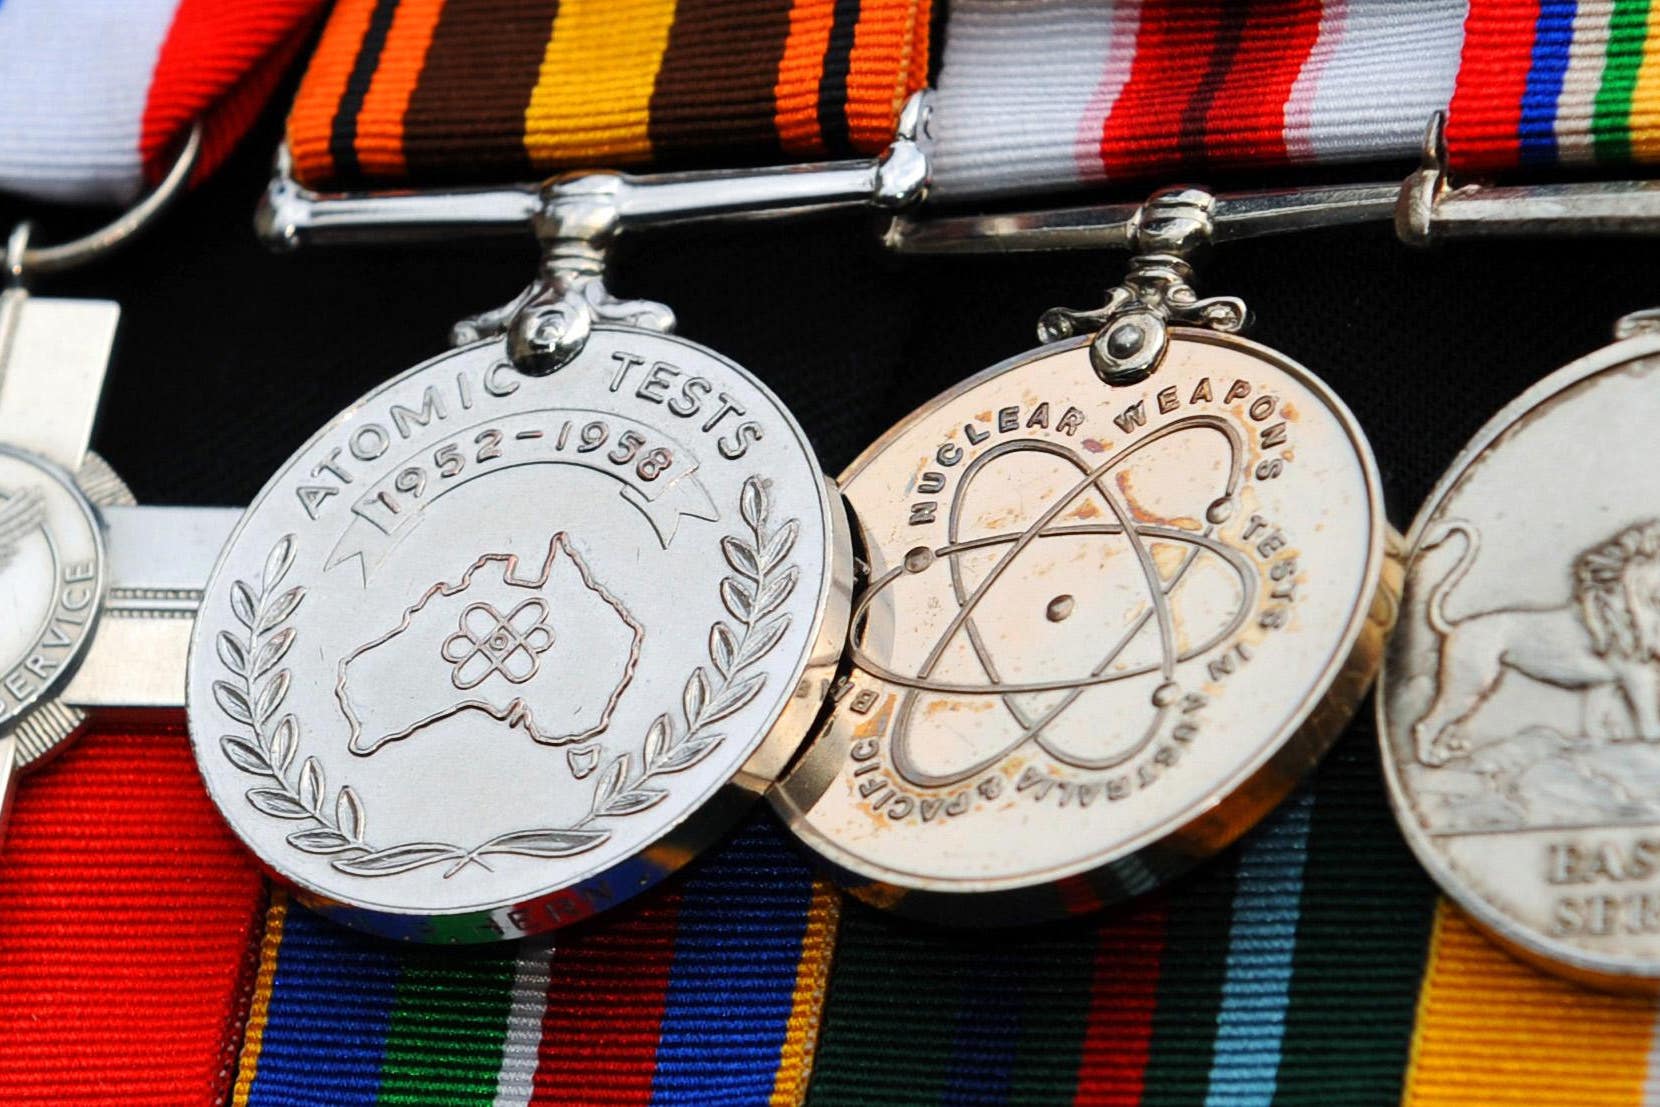 Campaign medals of a veteran of British nuclear bomb tests (PA)